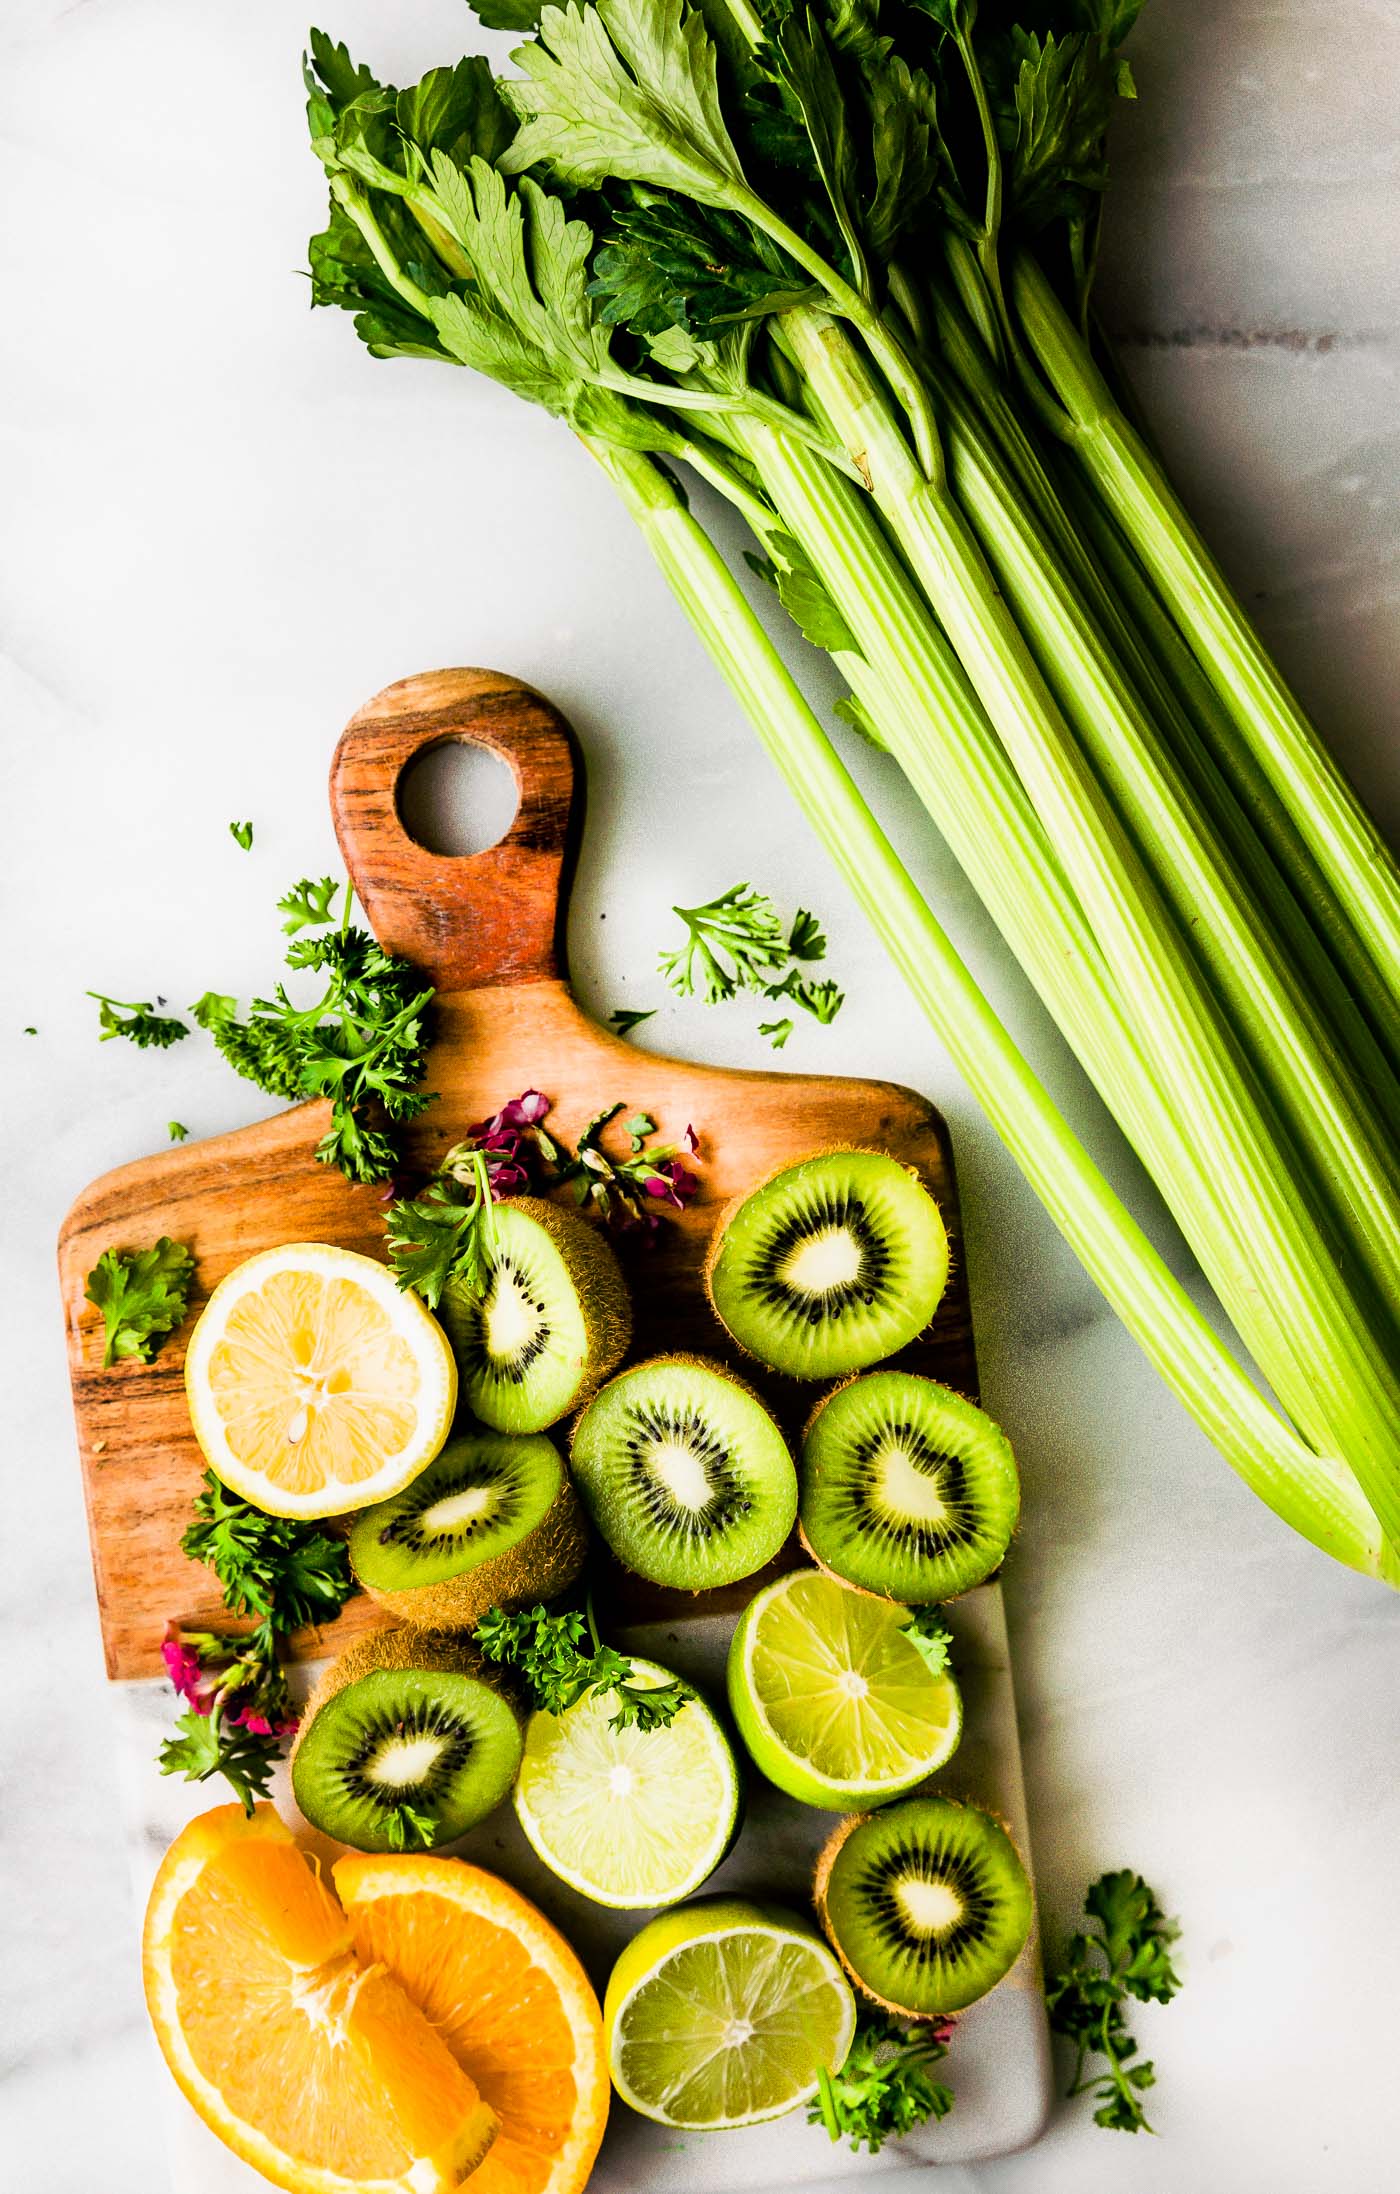 Ingredients for green smoothie arranged together on wooden cutting board.